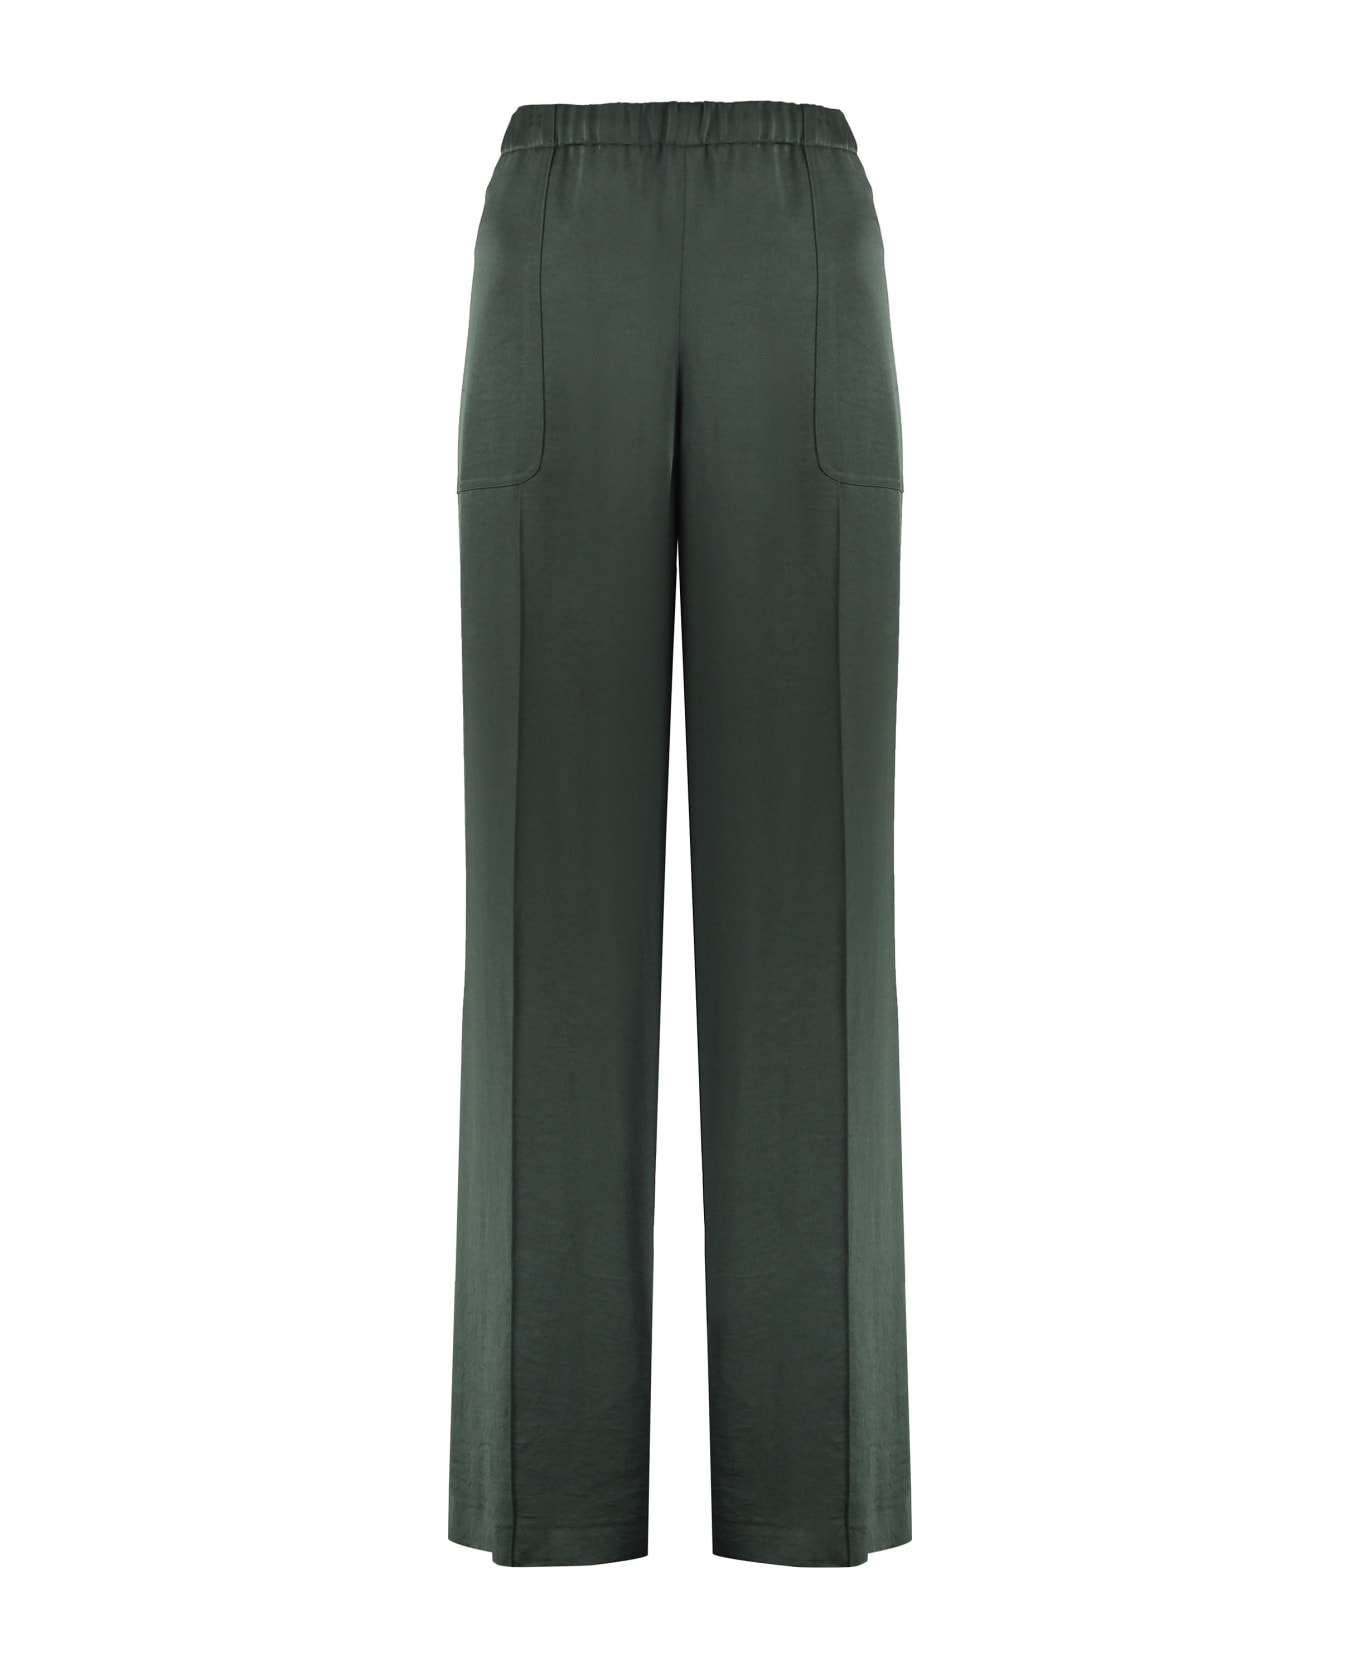 Vince Satin Trousers - green ボトムス